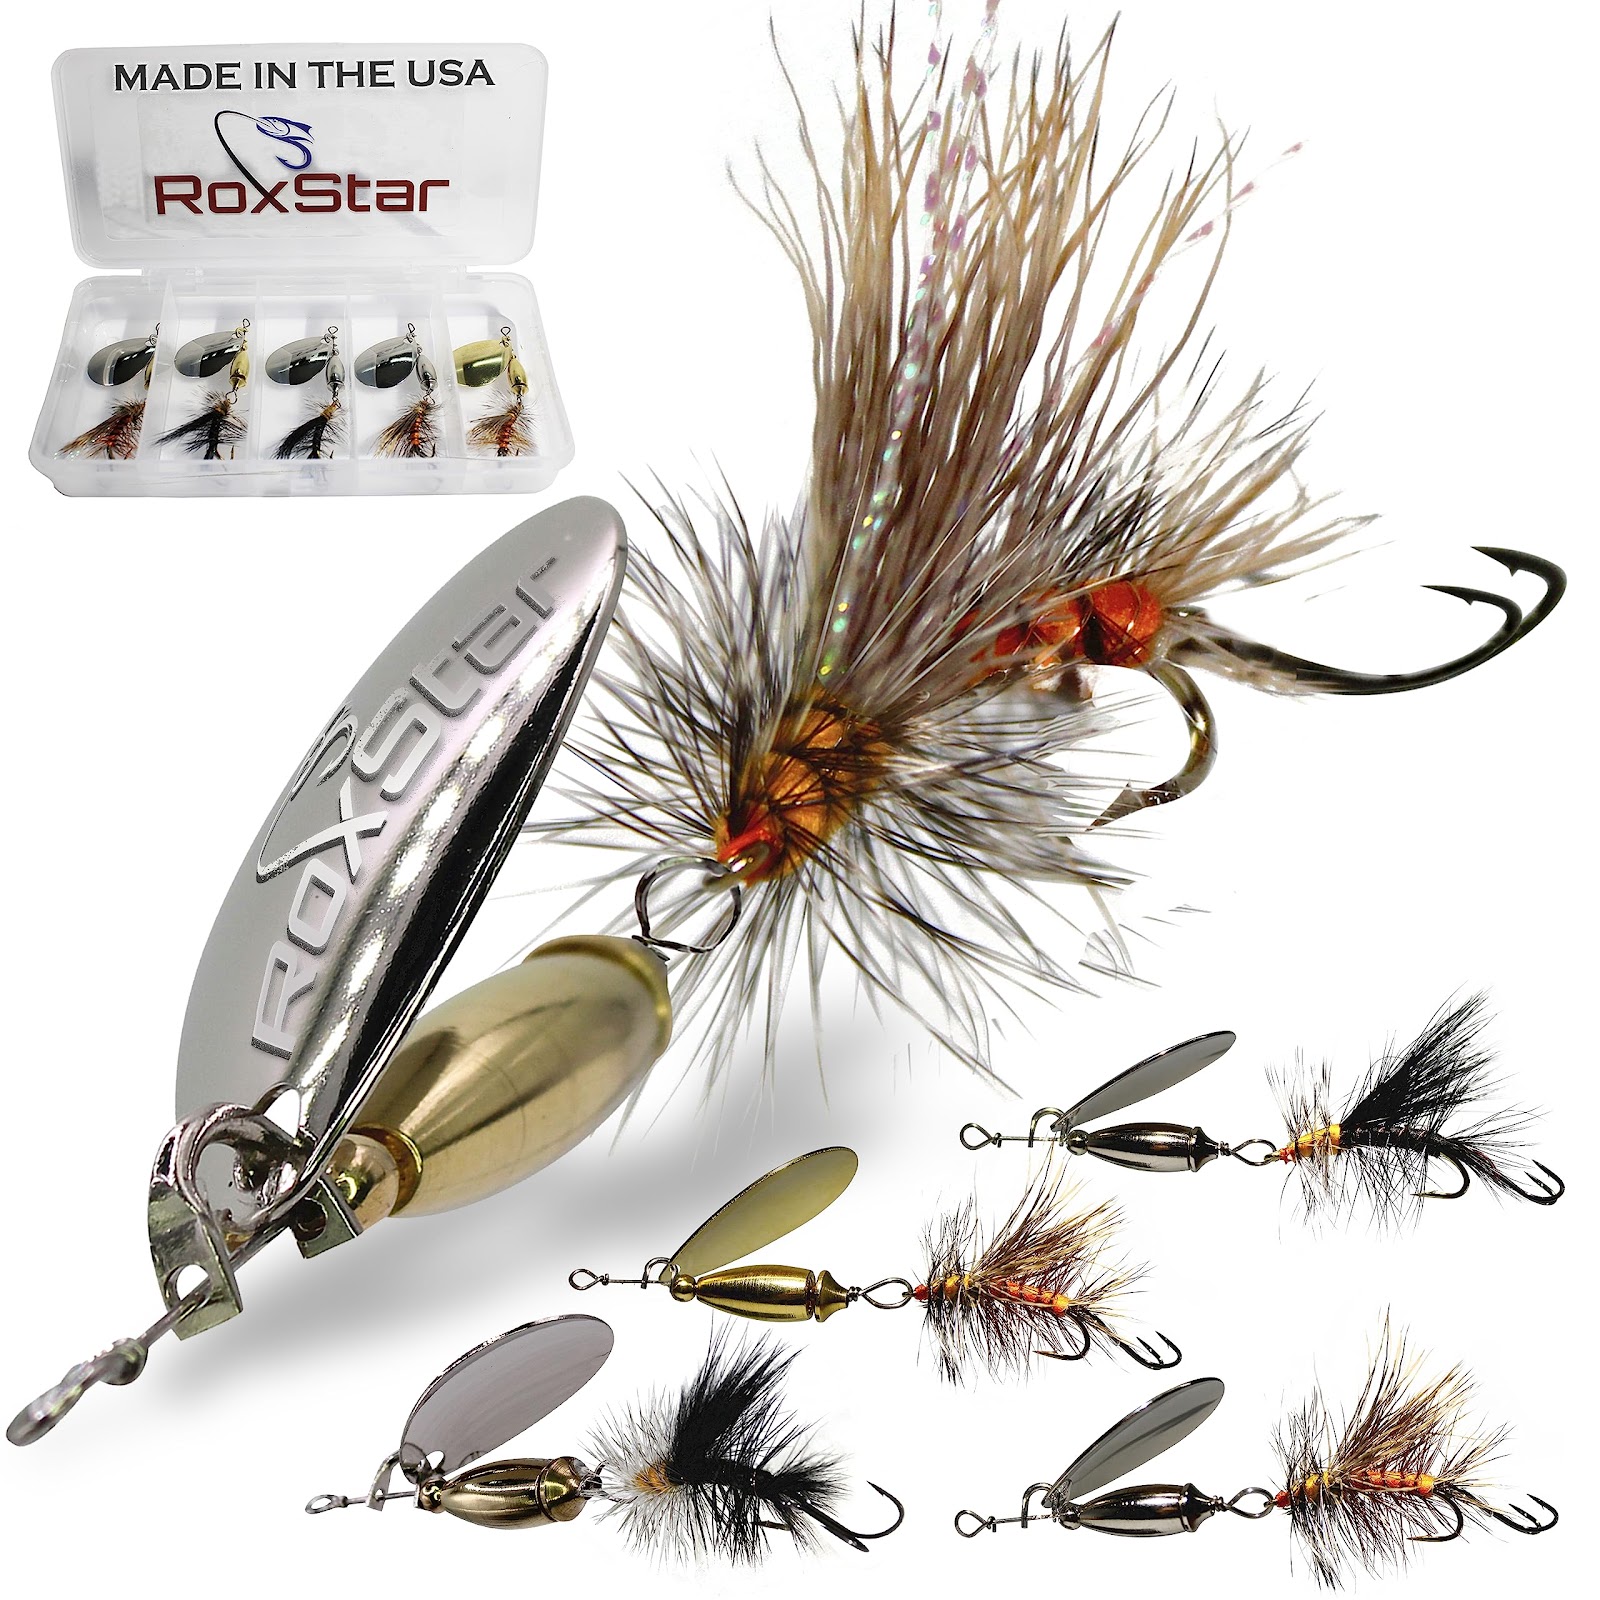 RoxStar Fly Strikers Proven Nationwide to Out-Fish Any Spinner | Hand-Tied in The USA | Most Versatile Fishing Spinner Ever! Trout, Bass, Steelhead | Stop Fishing - Start Catching 1/8oz Series 1